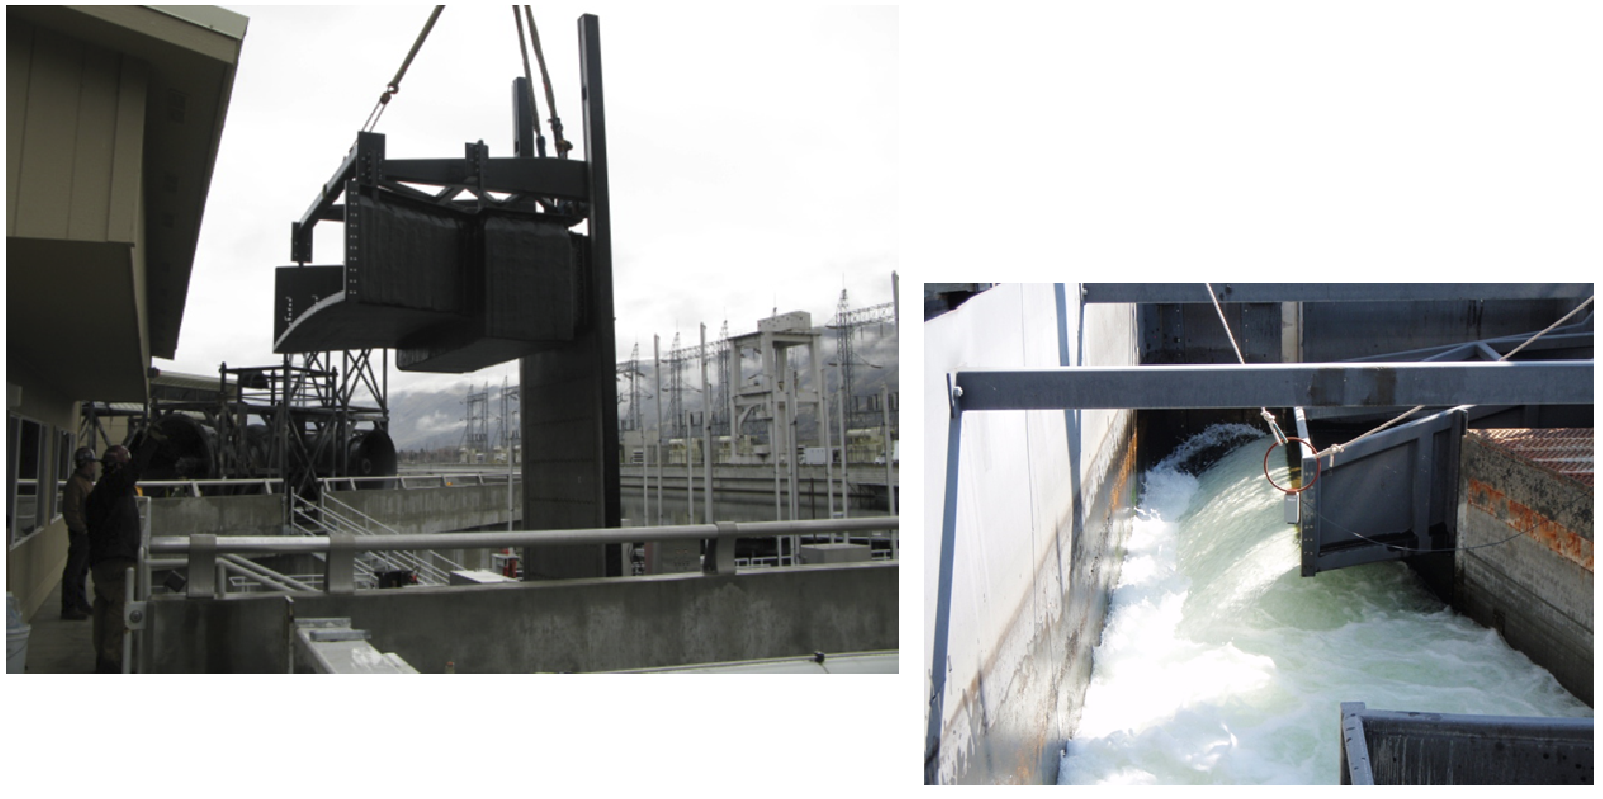 The FRP Flow Spreader was built to analysis specifications and is in operation today providing in-stream salmon migration data - FEA Consultants - Experts in Composite Analysis